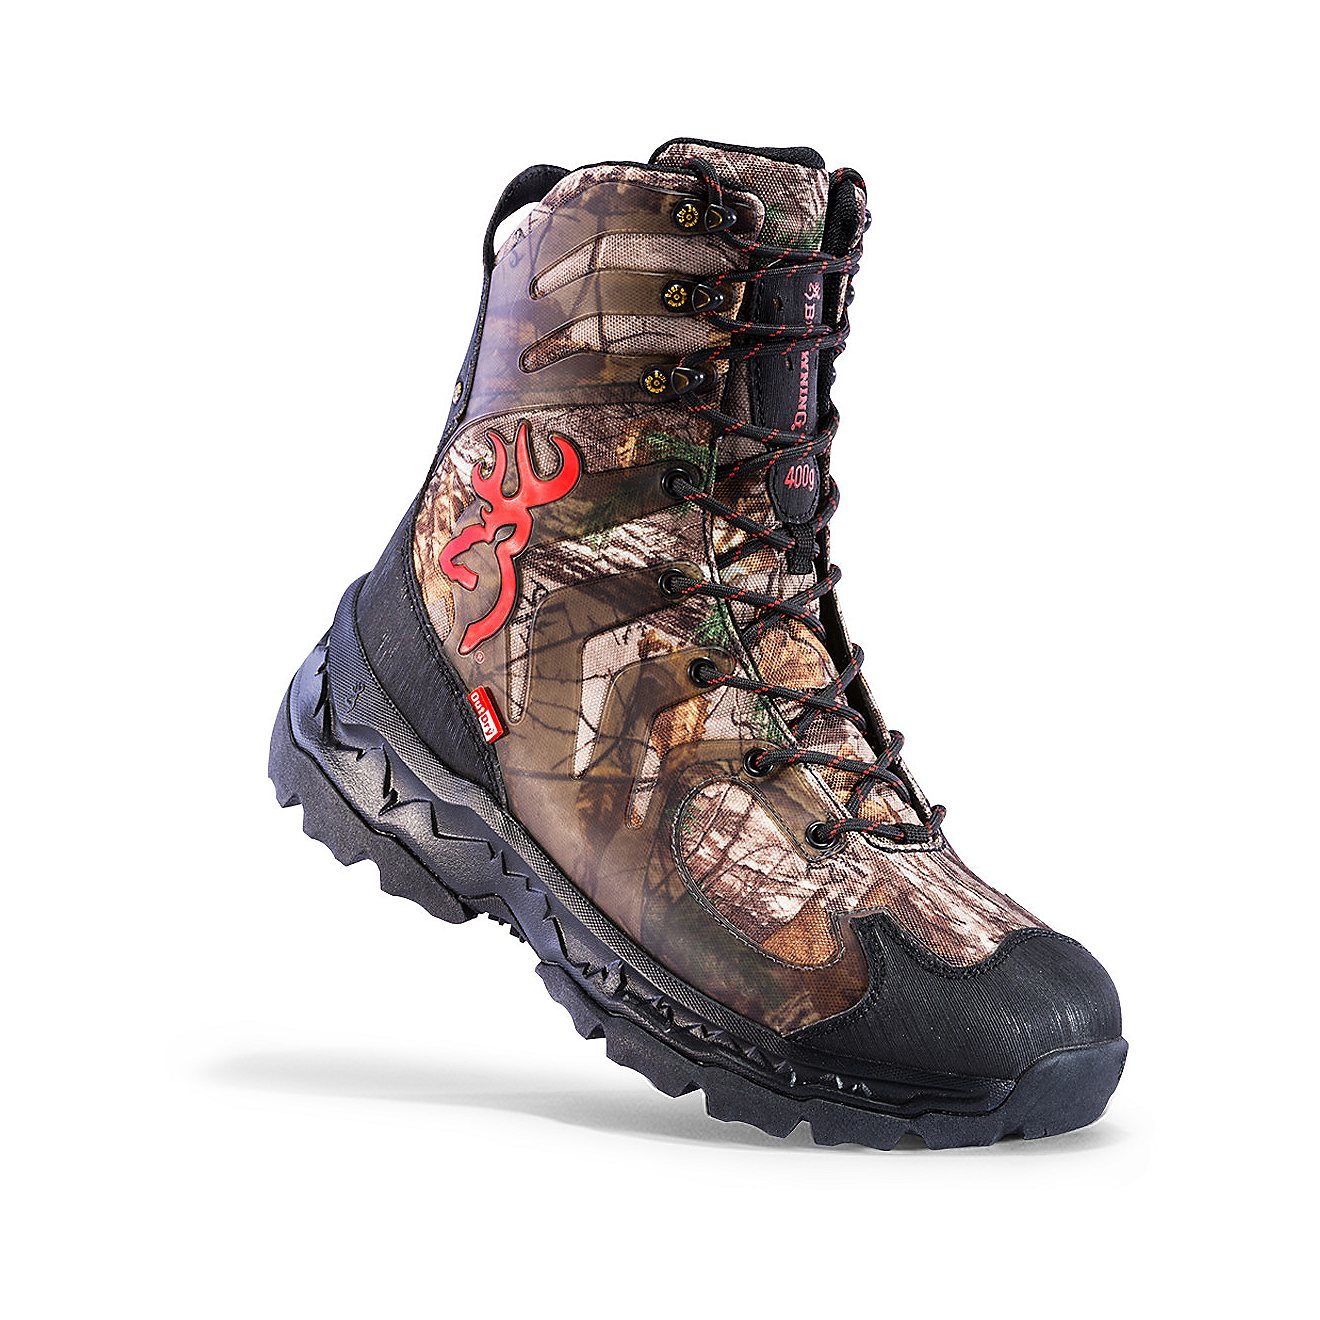 Browning Men's Buck Shadow 400 g Insulated Hunting Boots                                                                         - view number 3